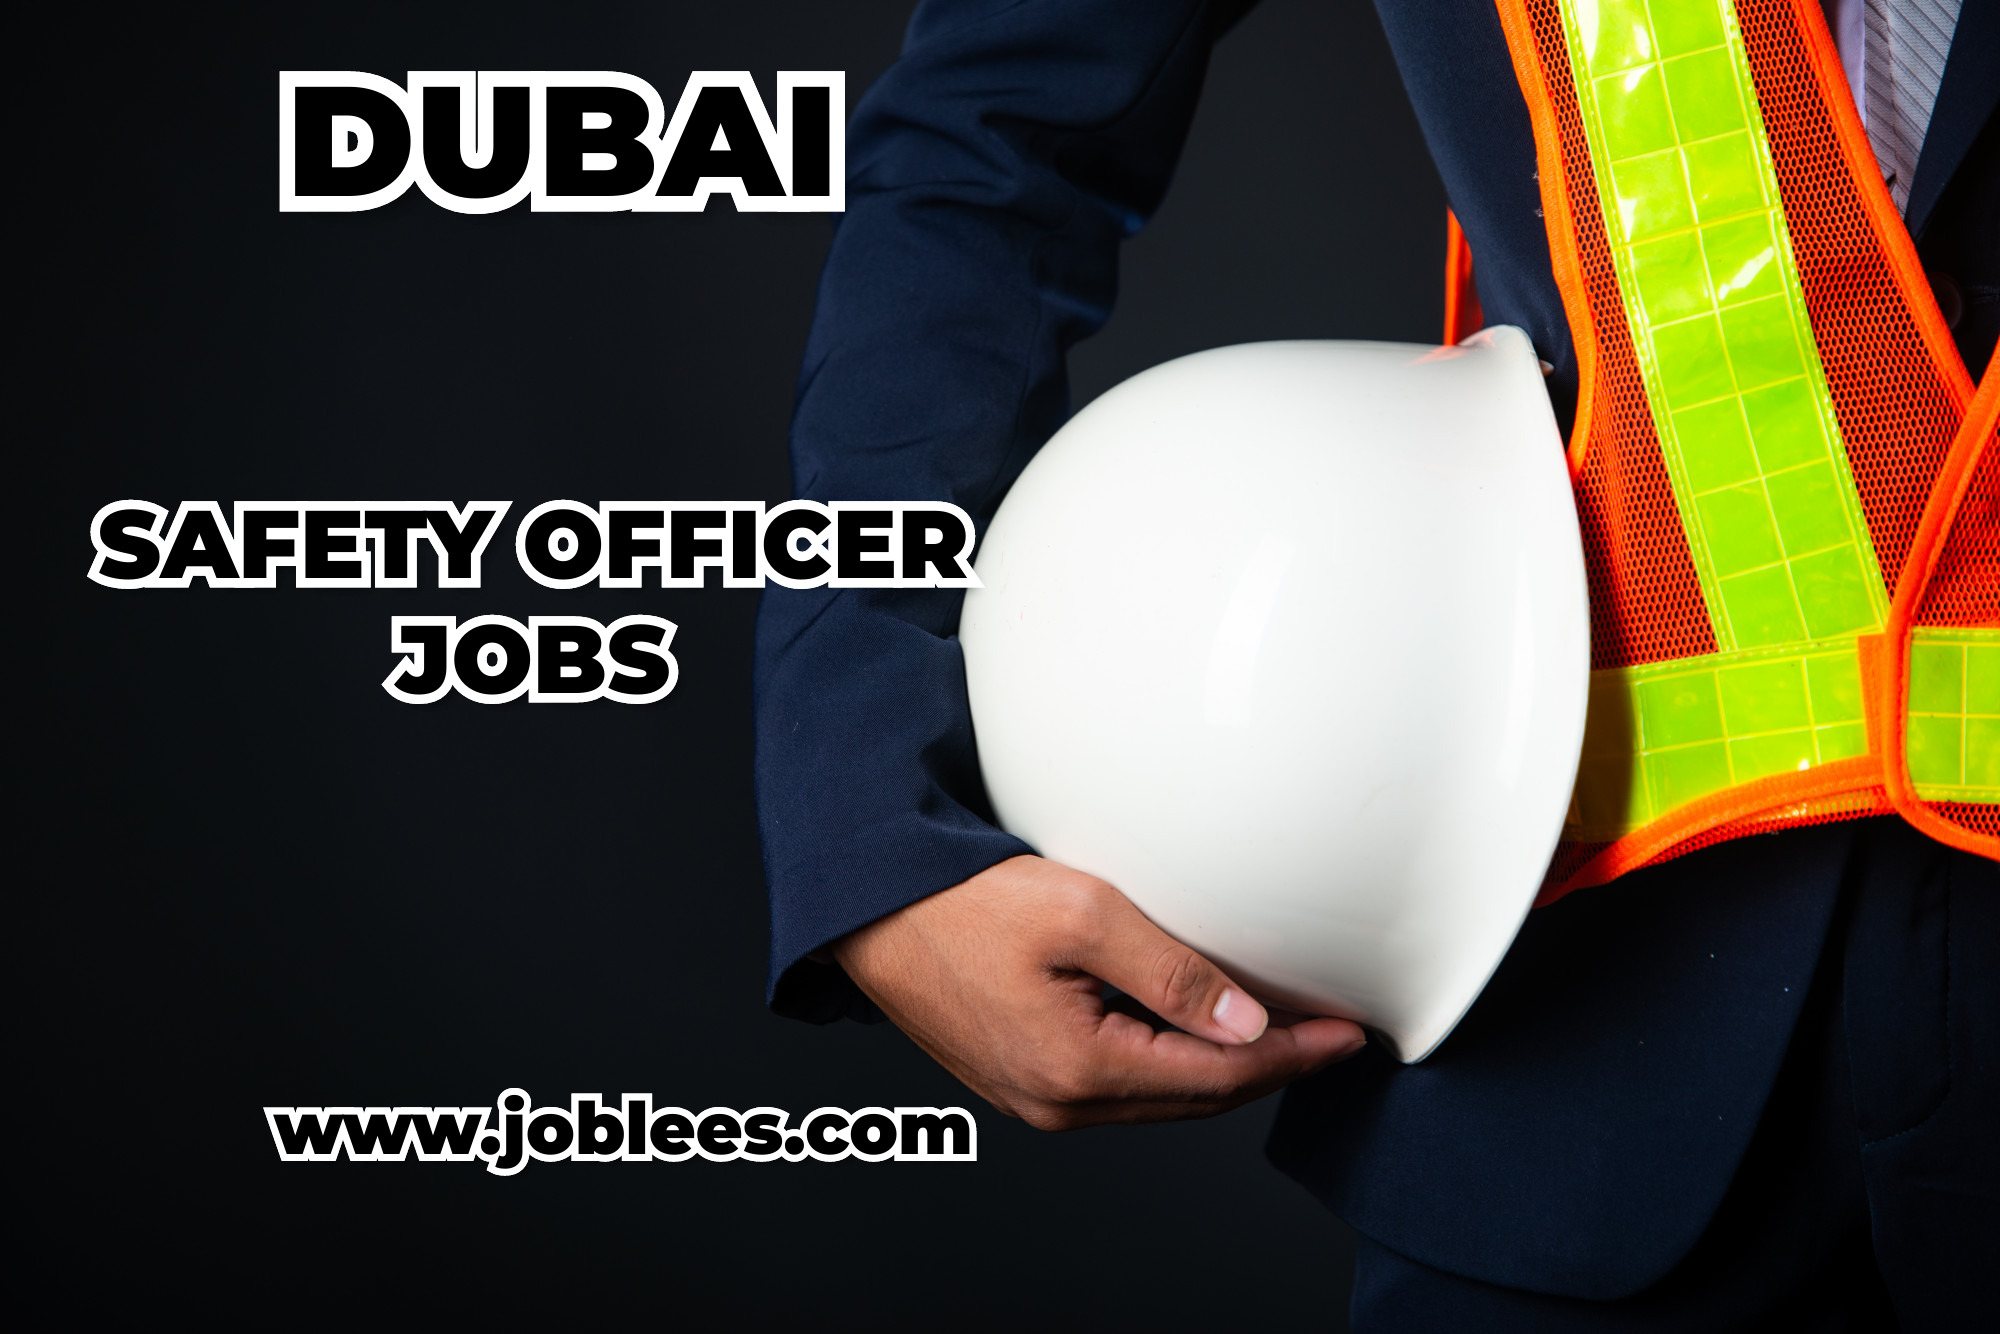 SAFETY OFFICER JOBS FOR OIL COMPANY OF DUBAI